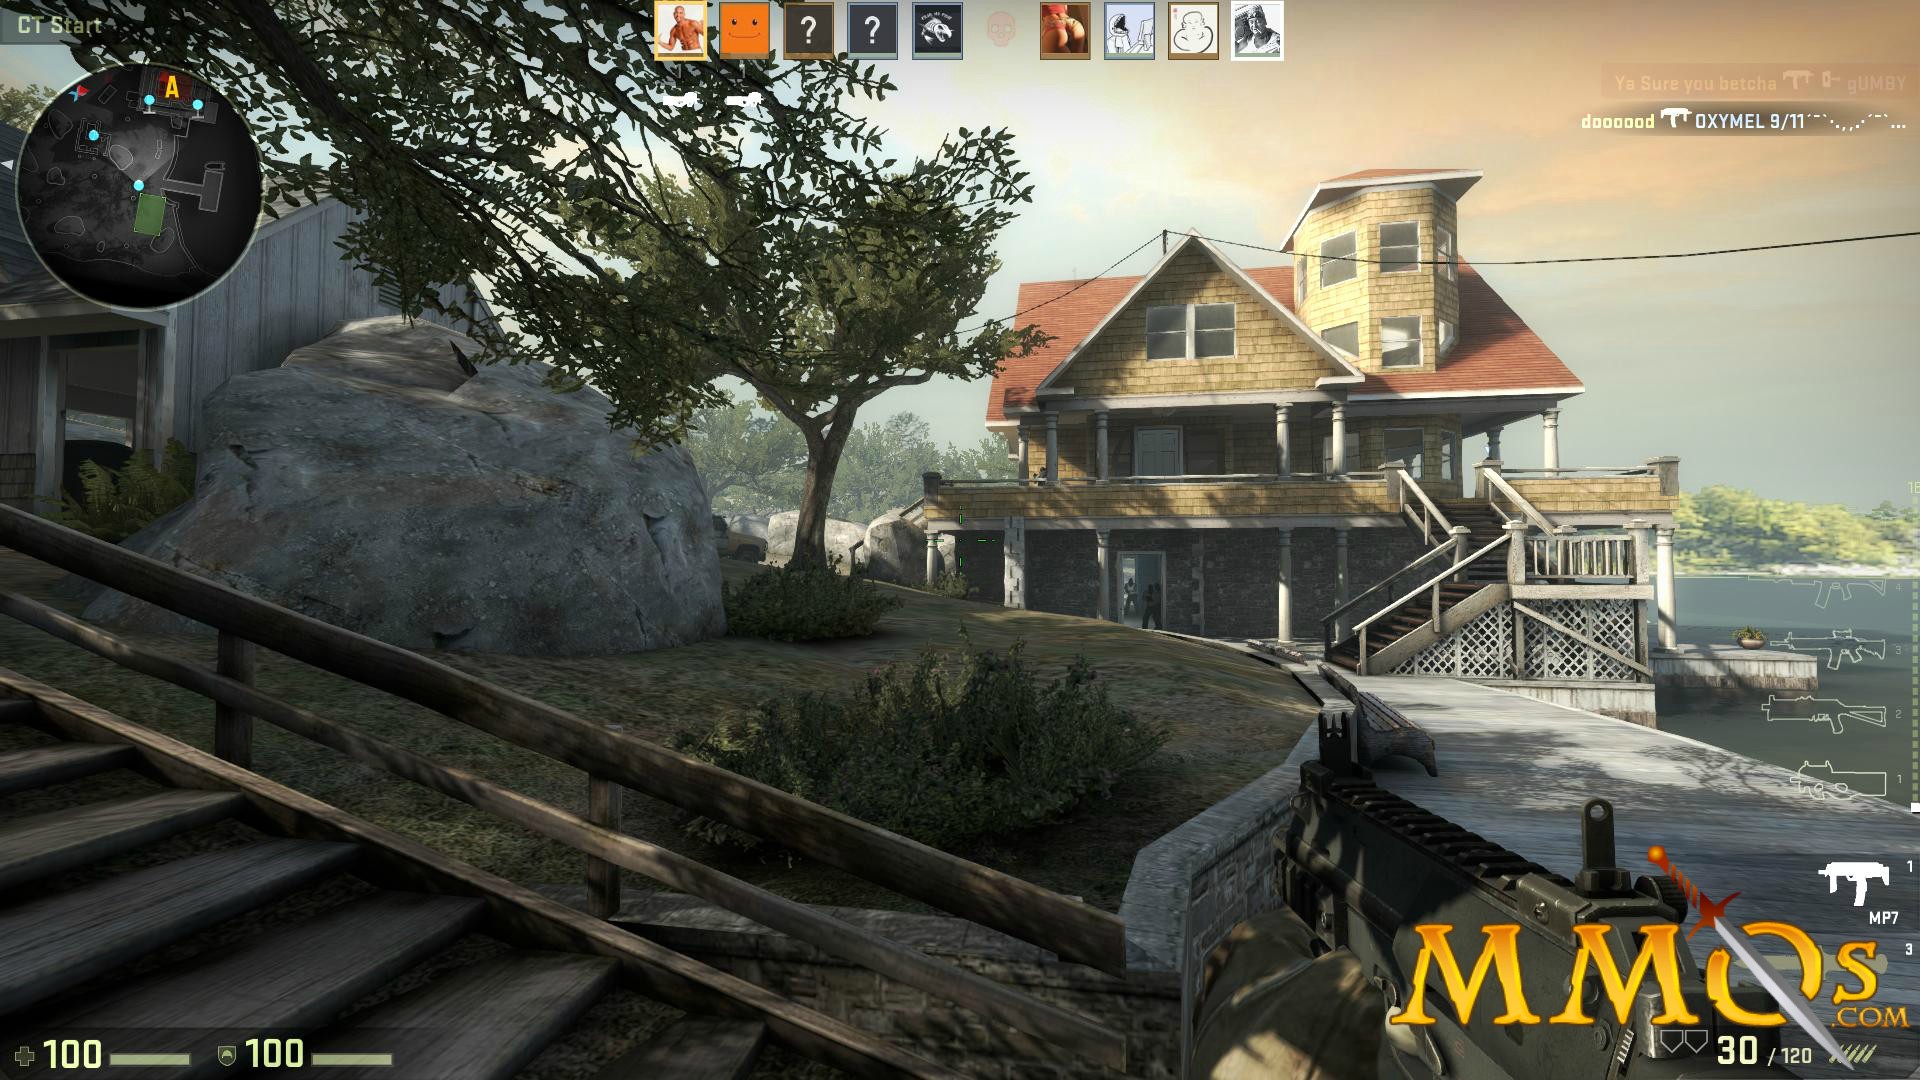 A New Counter-Strike Game With Better Graphics And Matchmaking